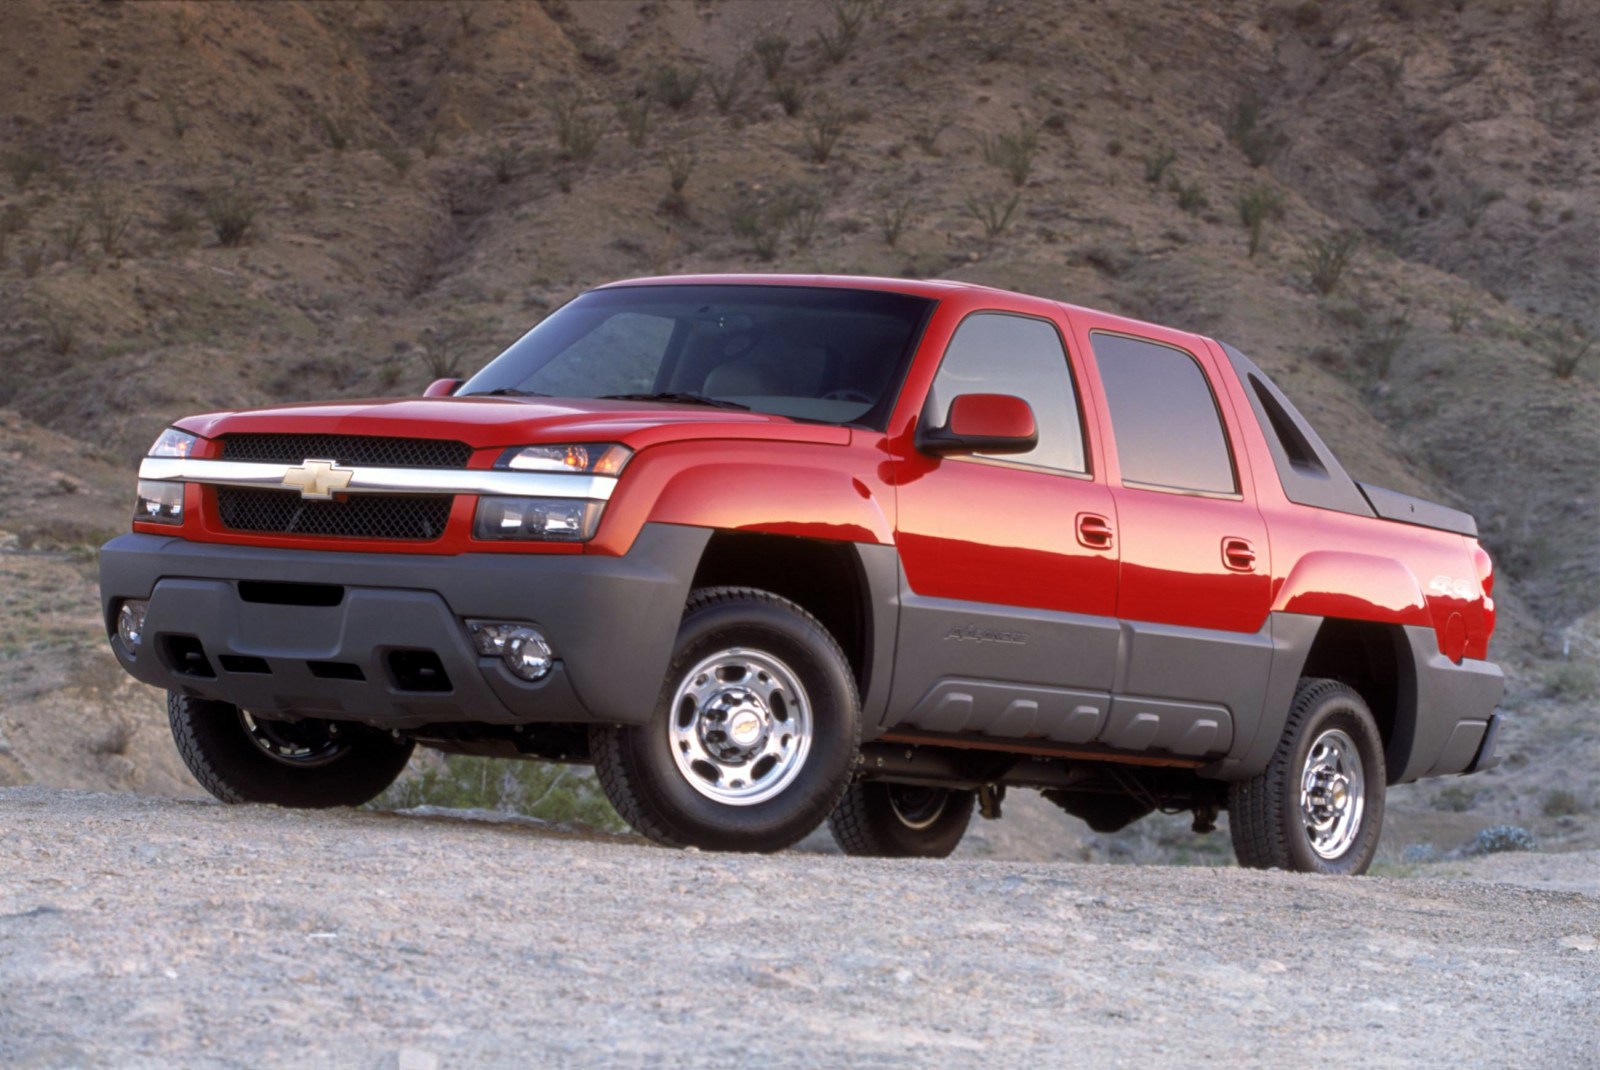 Mountain of Torque: Remembering the Short-Lived "Big-Block" Chevrolet